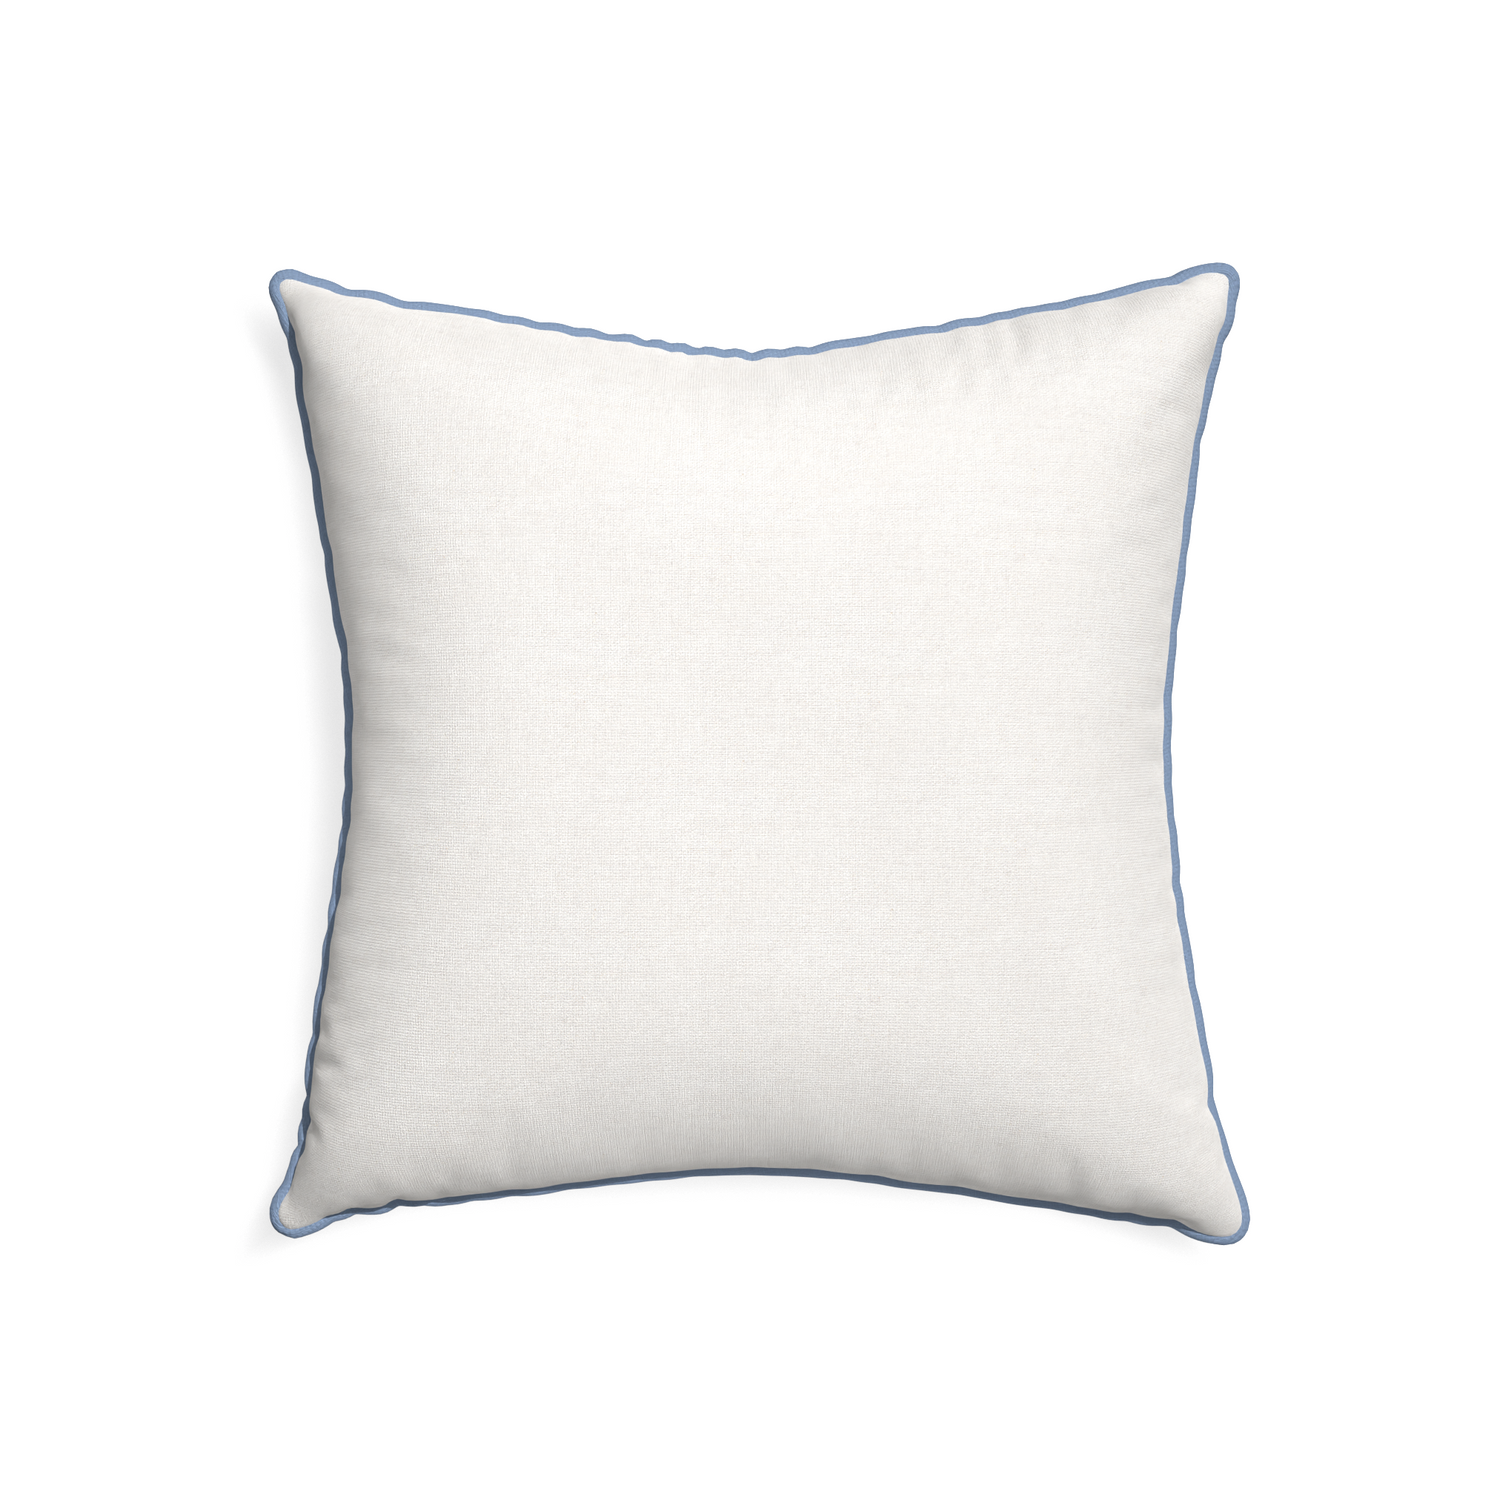 22-square flour custom pillow with sky piping on white background